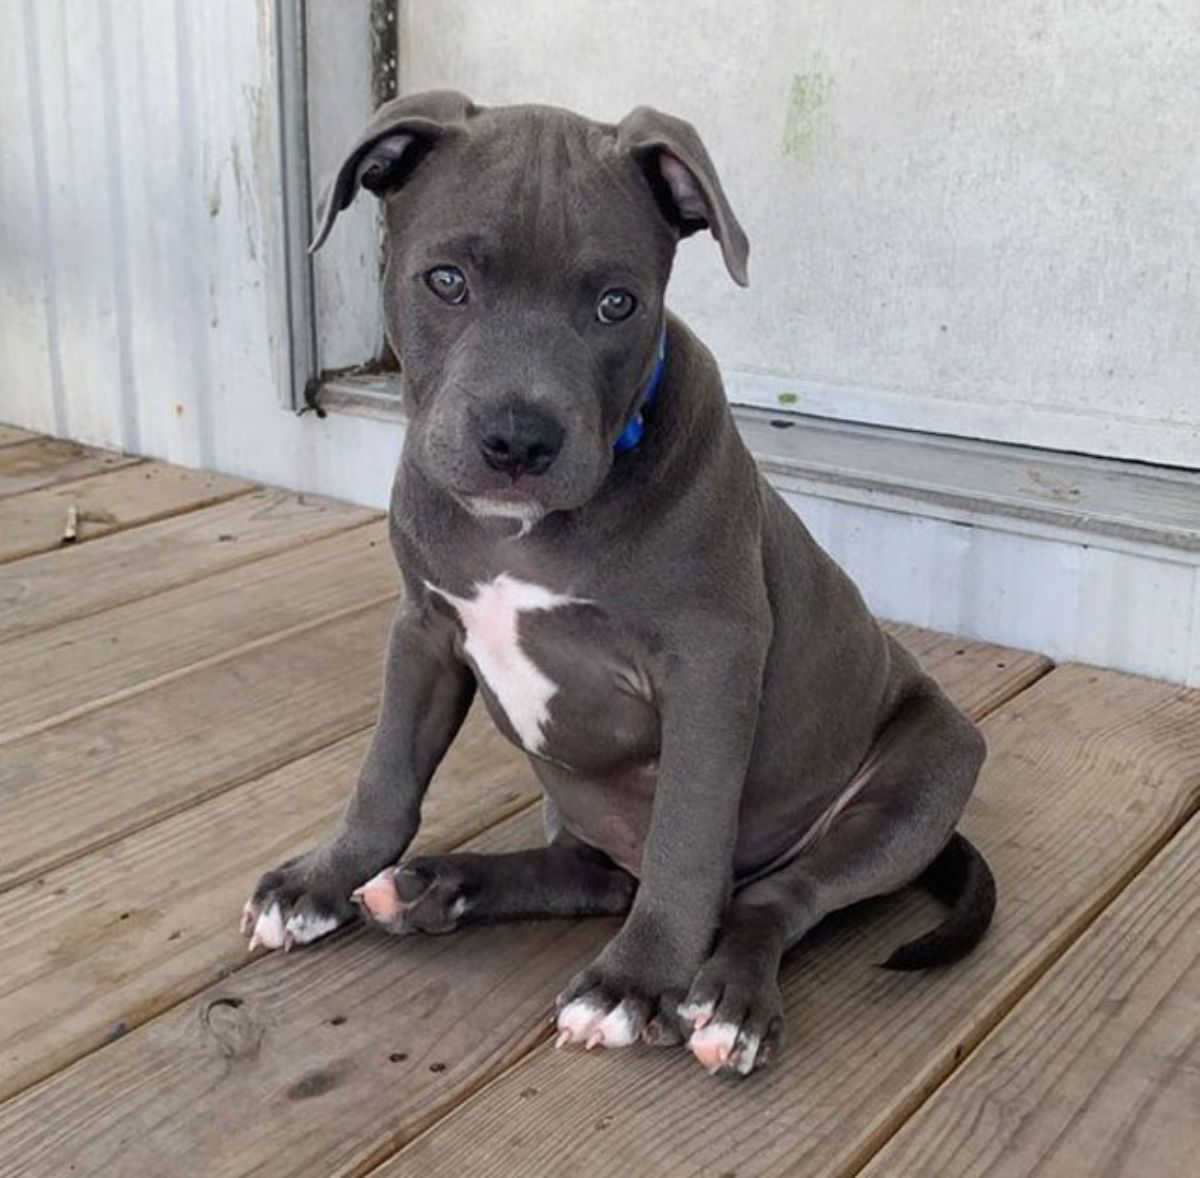 grey and white pitbull puppy sitting on its haunches